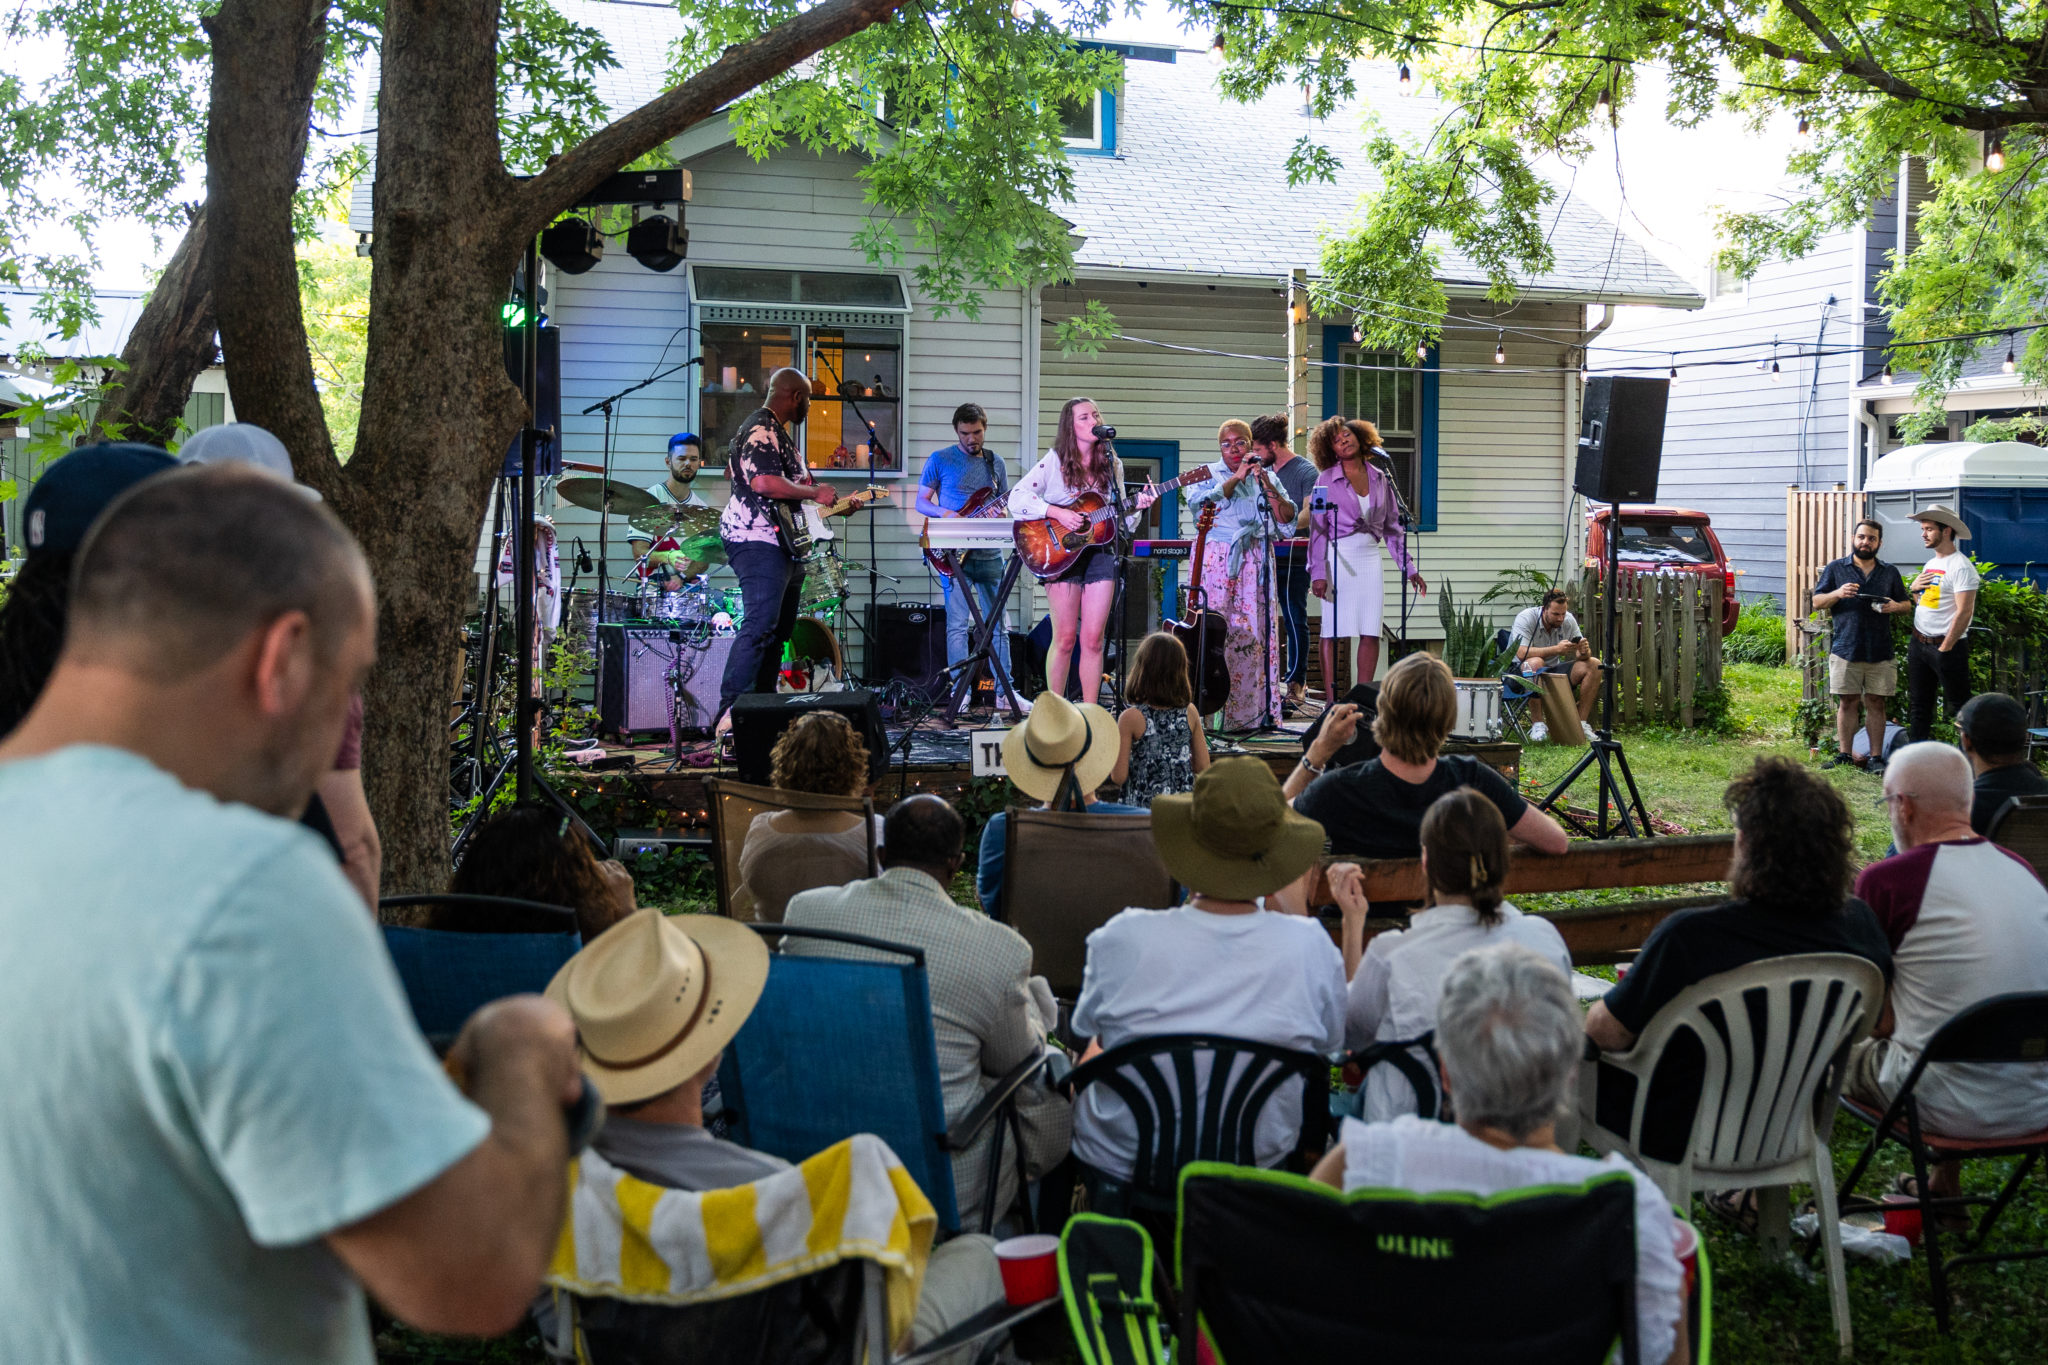 crowd of people and back yard stage with musicians playing